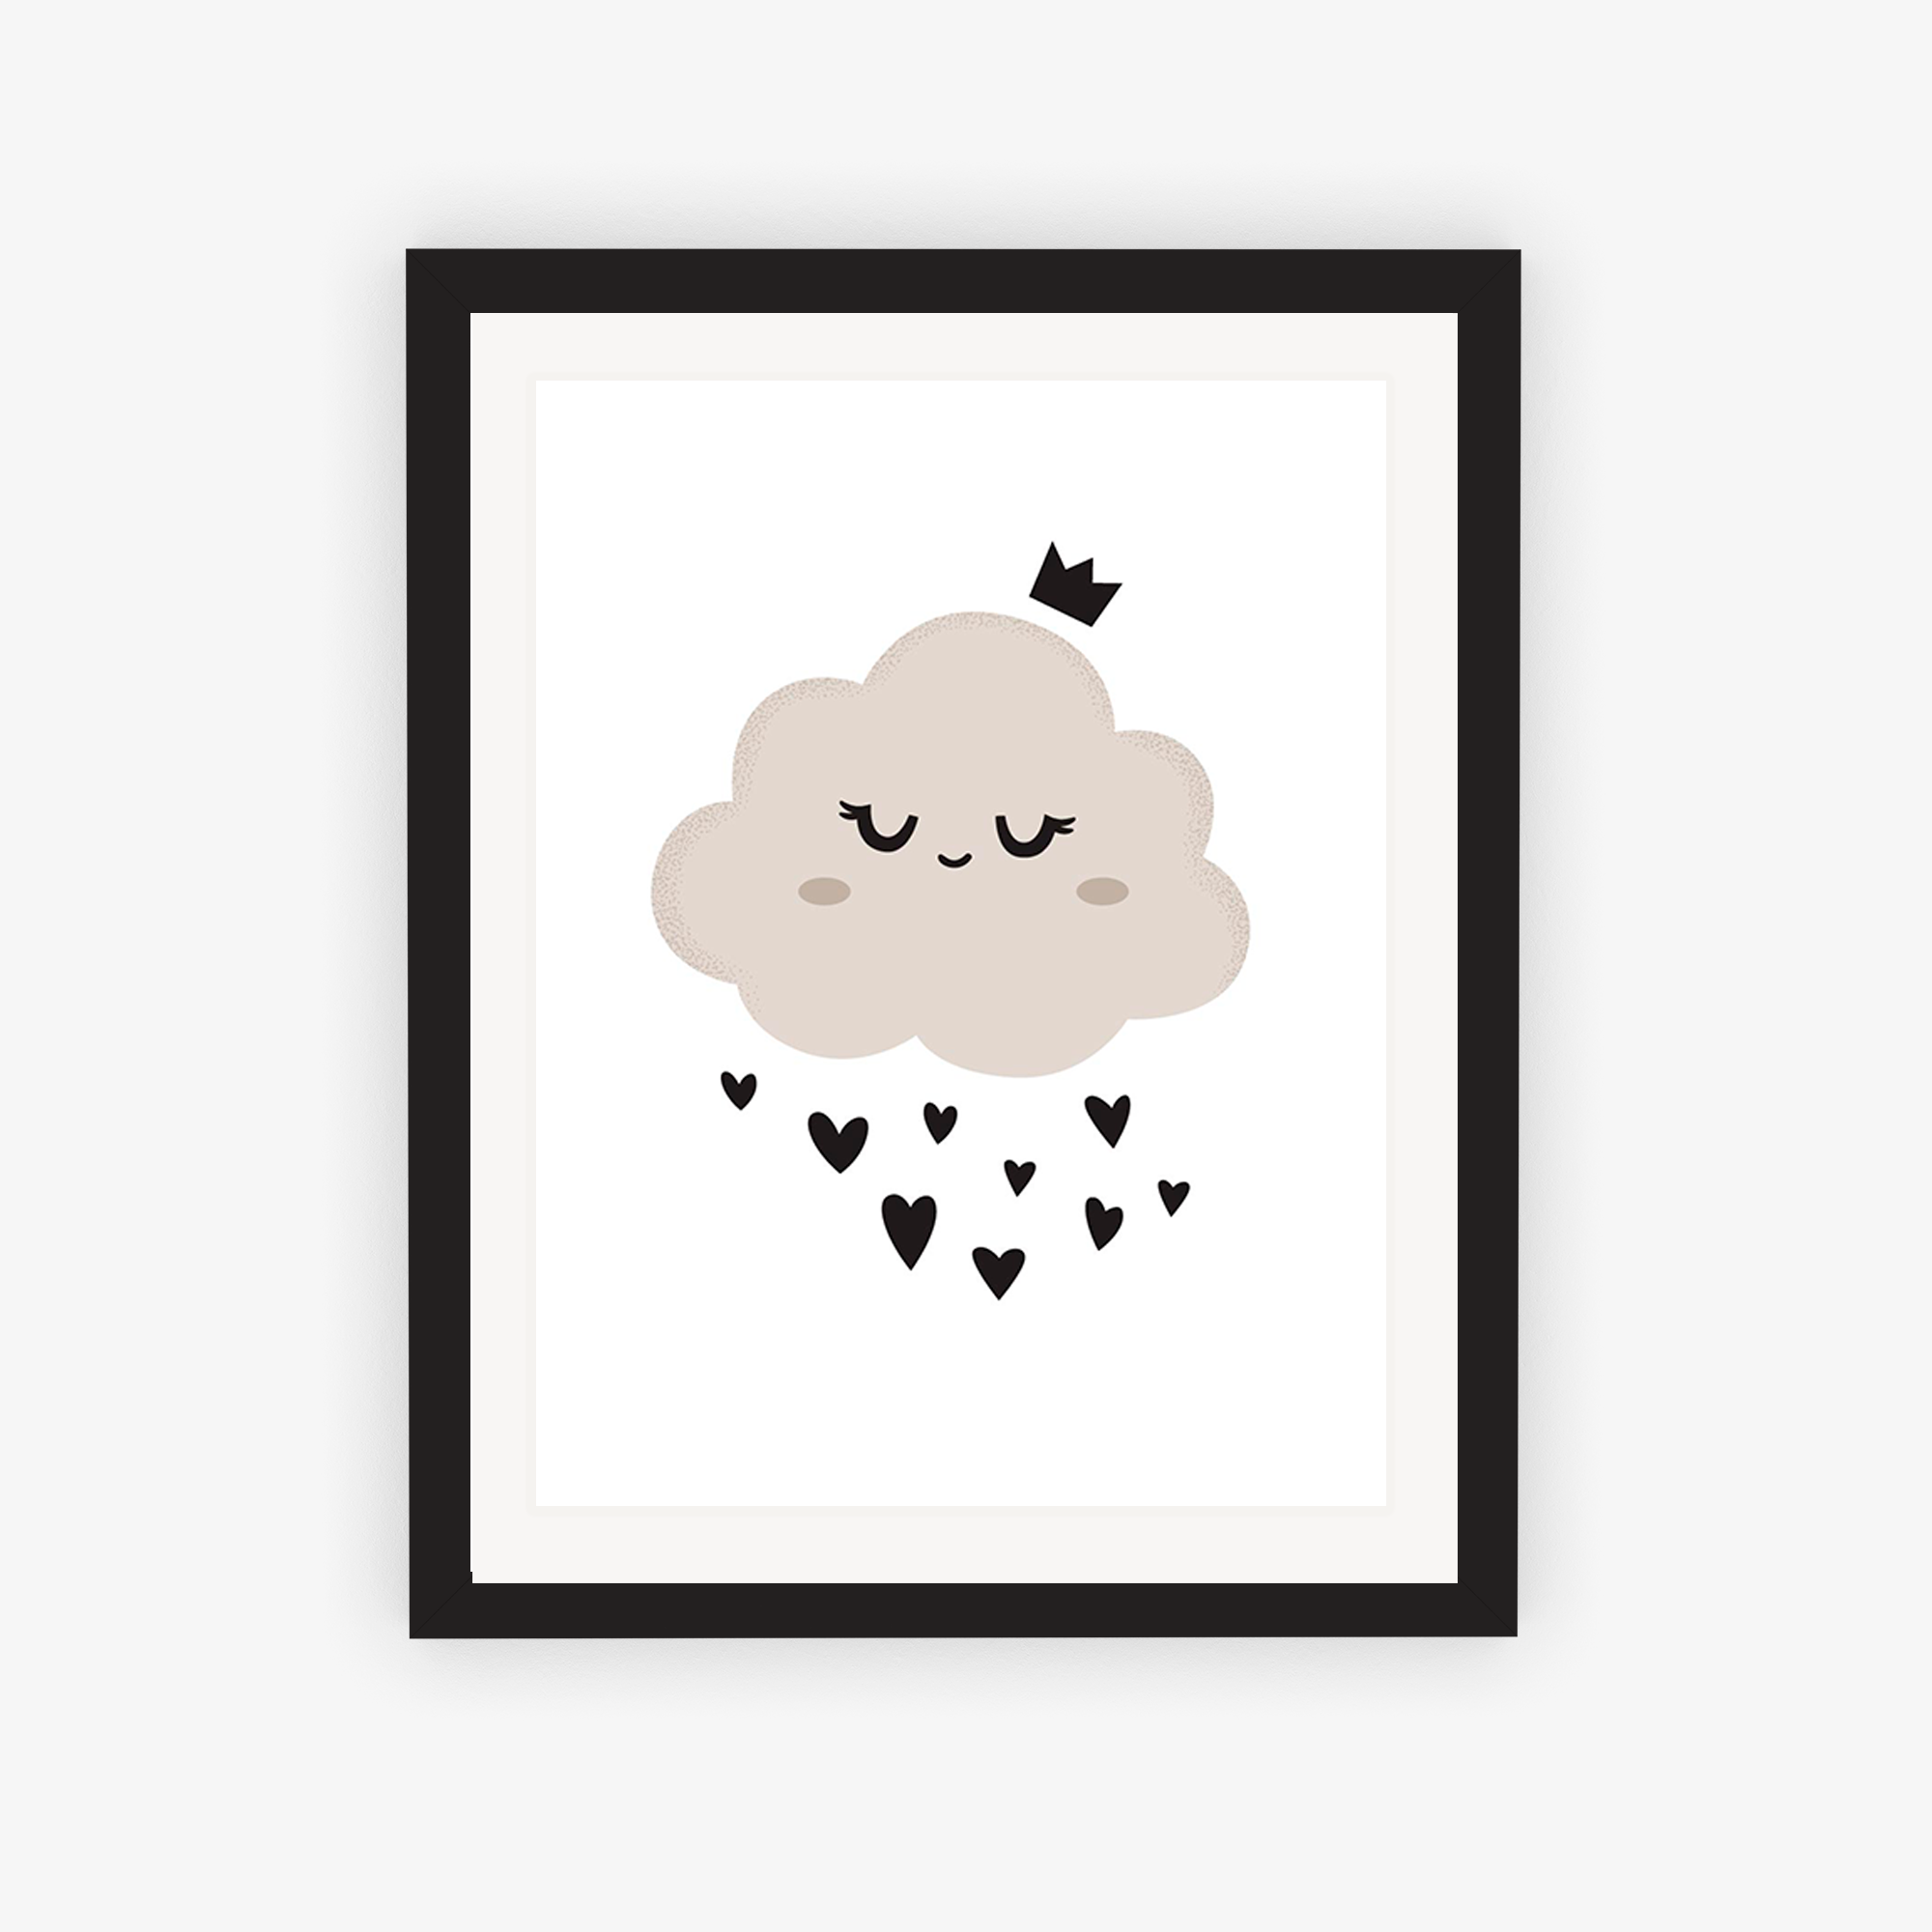 Cloudy Love Showers Poster